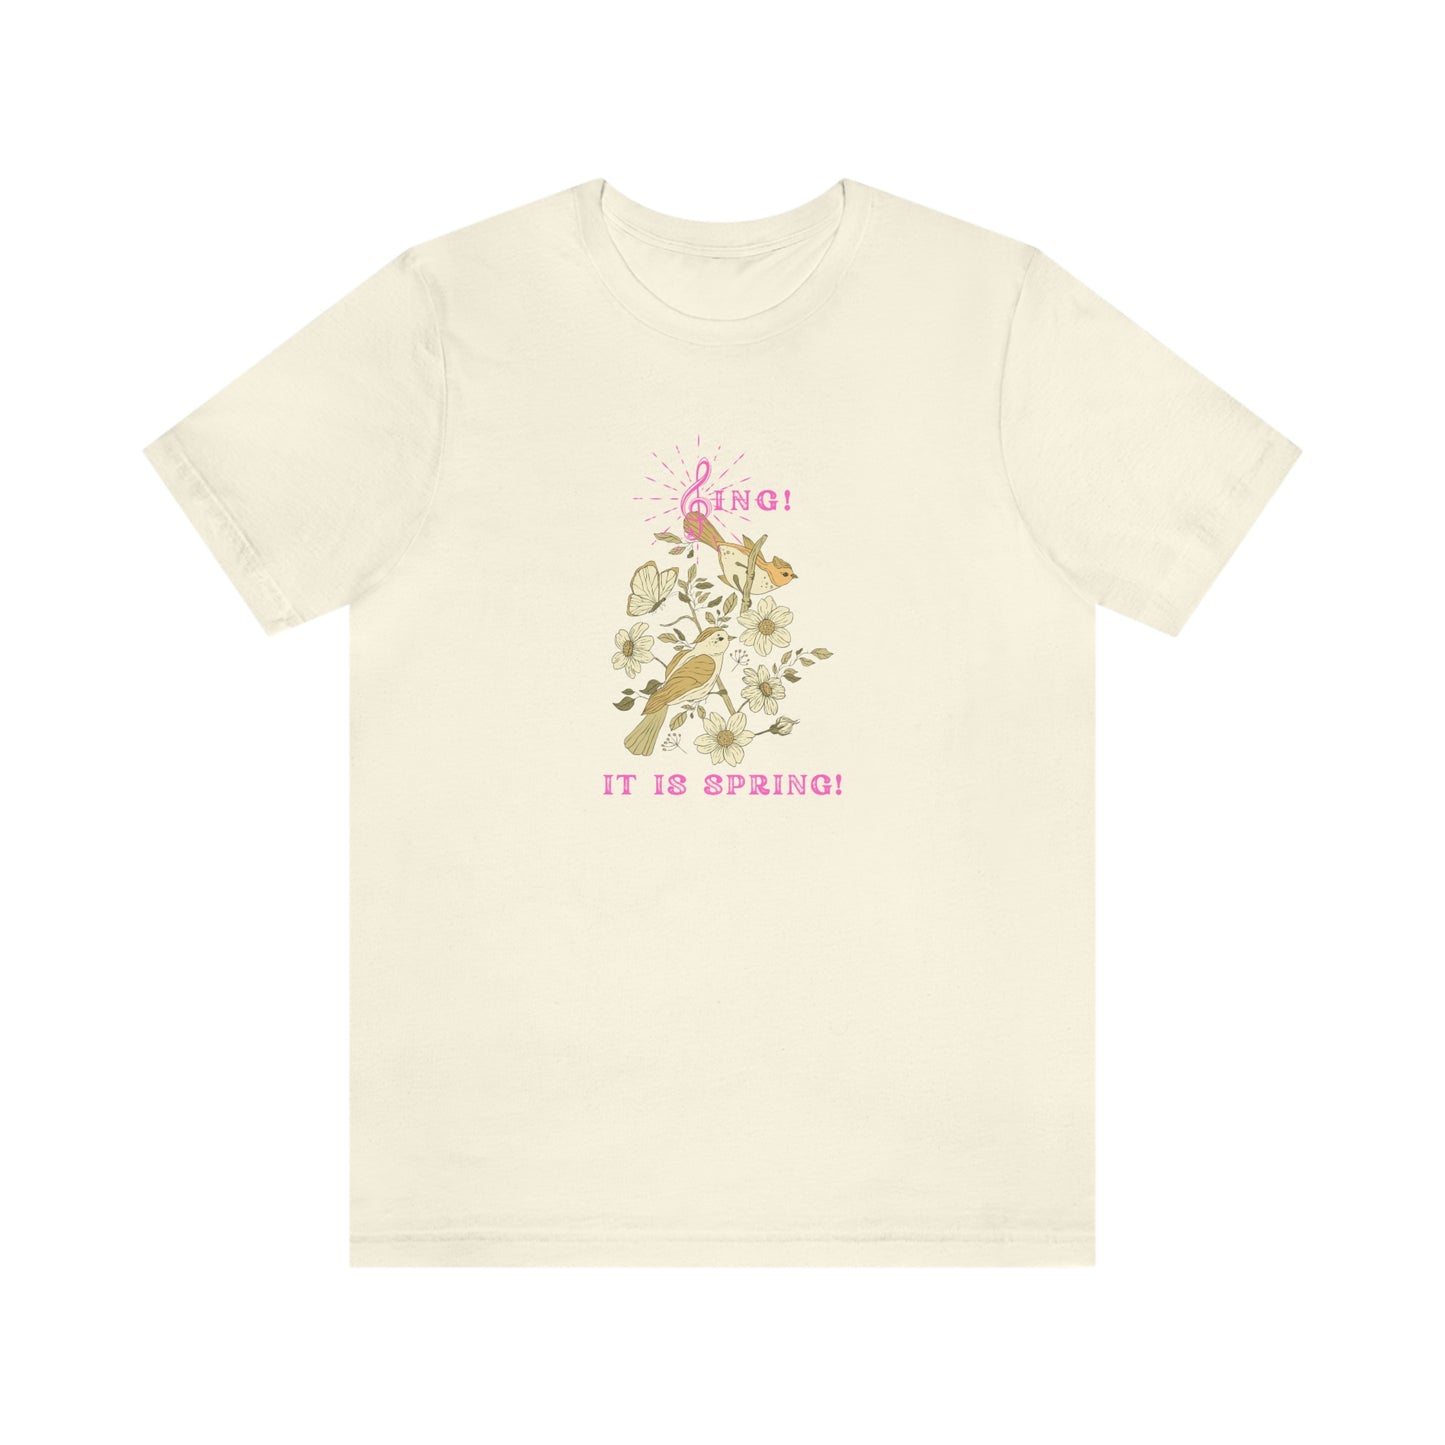 SING IT IS SPRING UNISEX  CREW NECK T SHIRT GIFT WITH PINK FONT